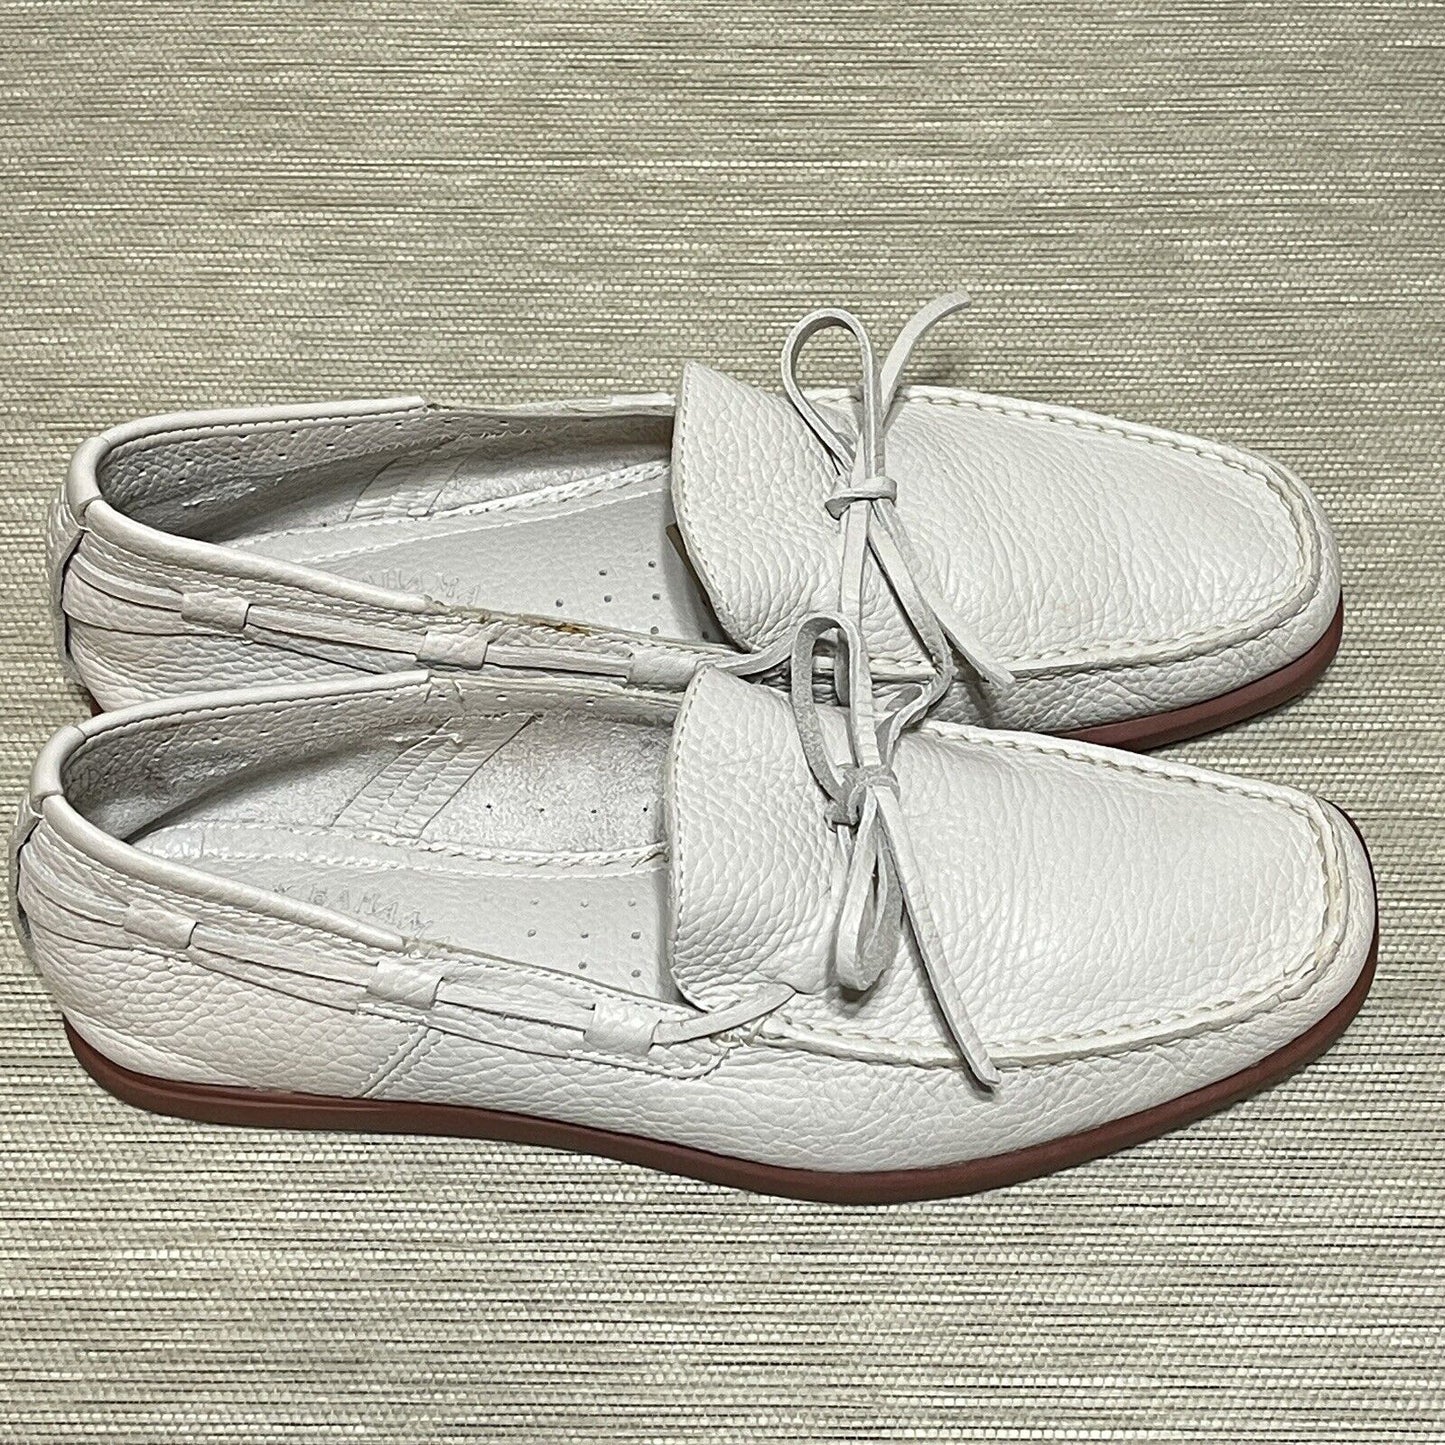 Tommy Bahama Mens Sz 10 M Barbados Boat Shoes Light Gray Leather Loafer Slip On